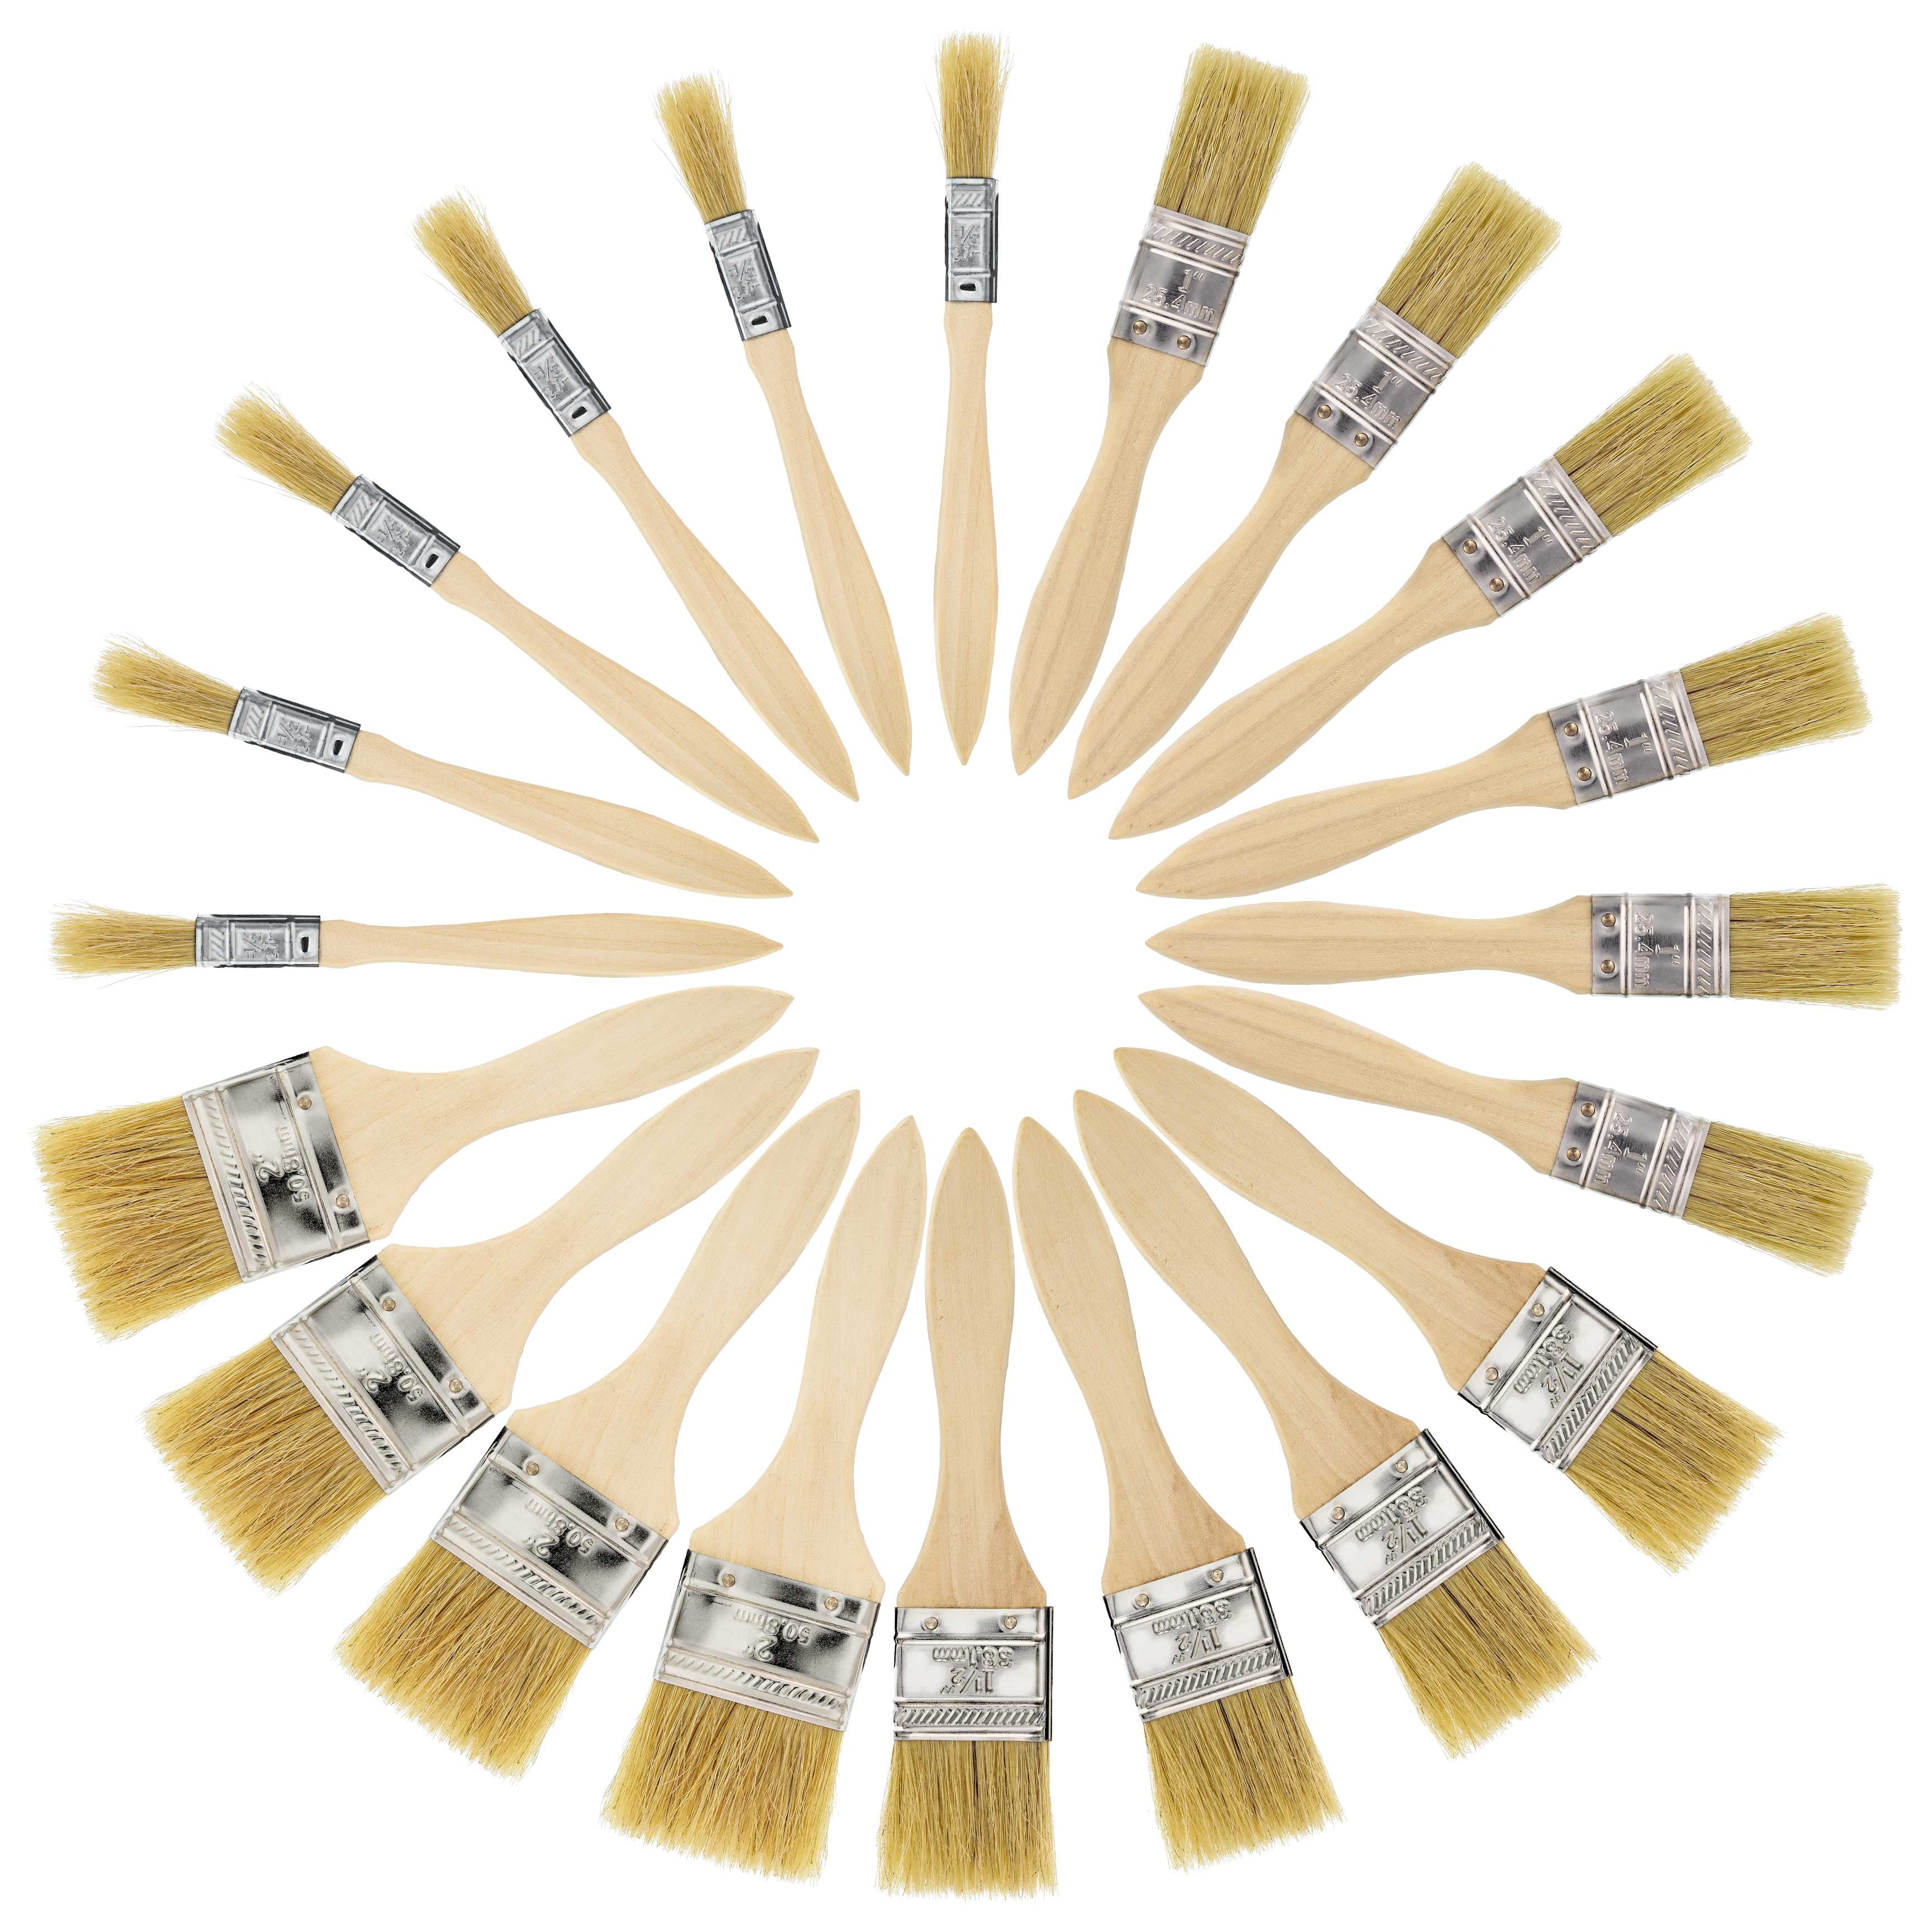 AIT Art Mini Liner Detail Paint Brushes, Size 3/0, Pack of 3, Handmade in USA for Trusted Performance Painting Small Details with Oil, Acrylic, and Wa